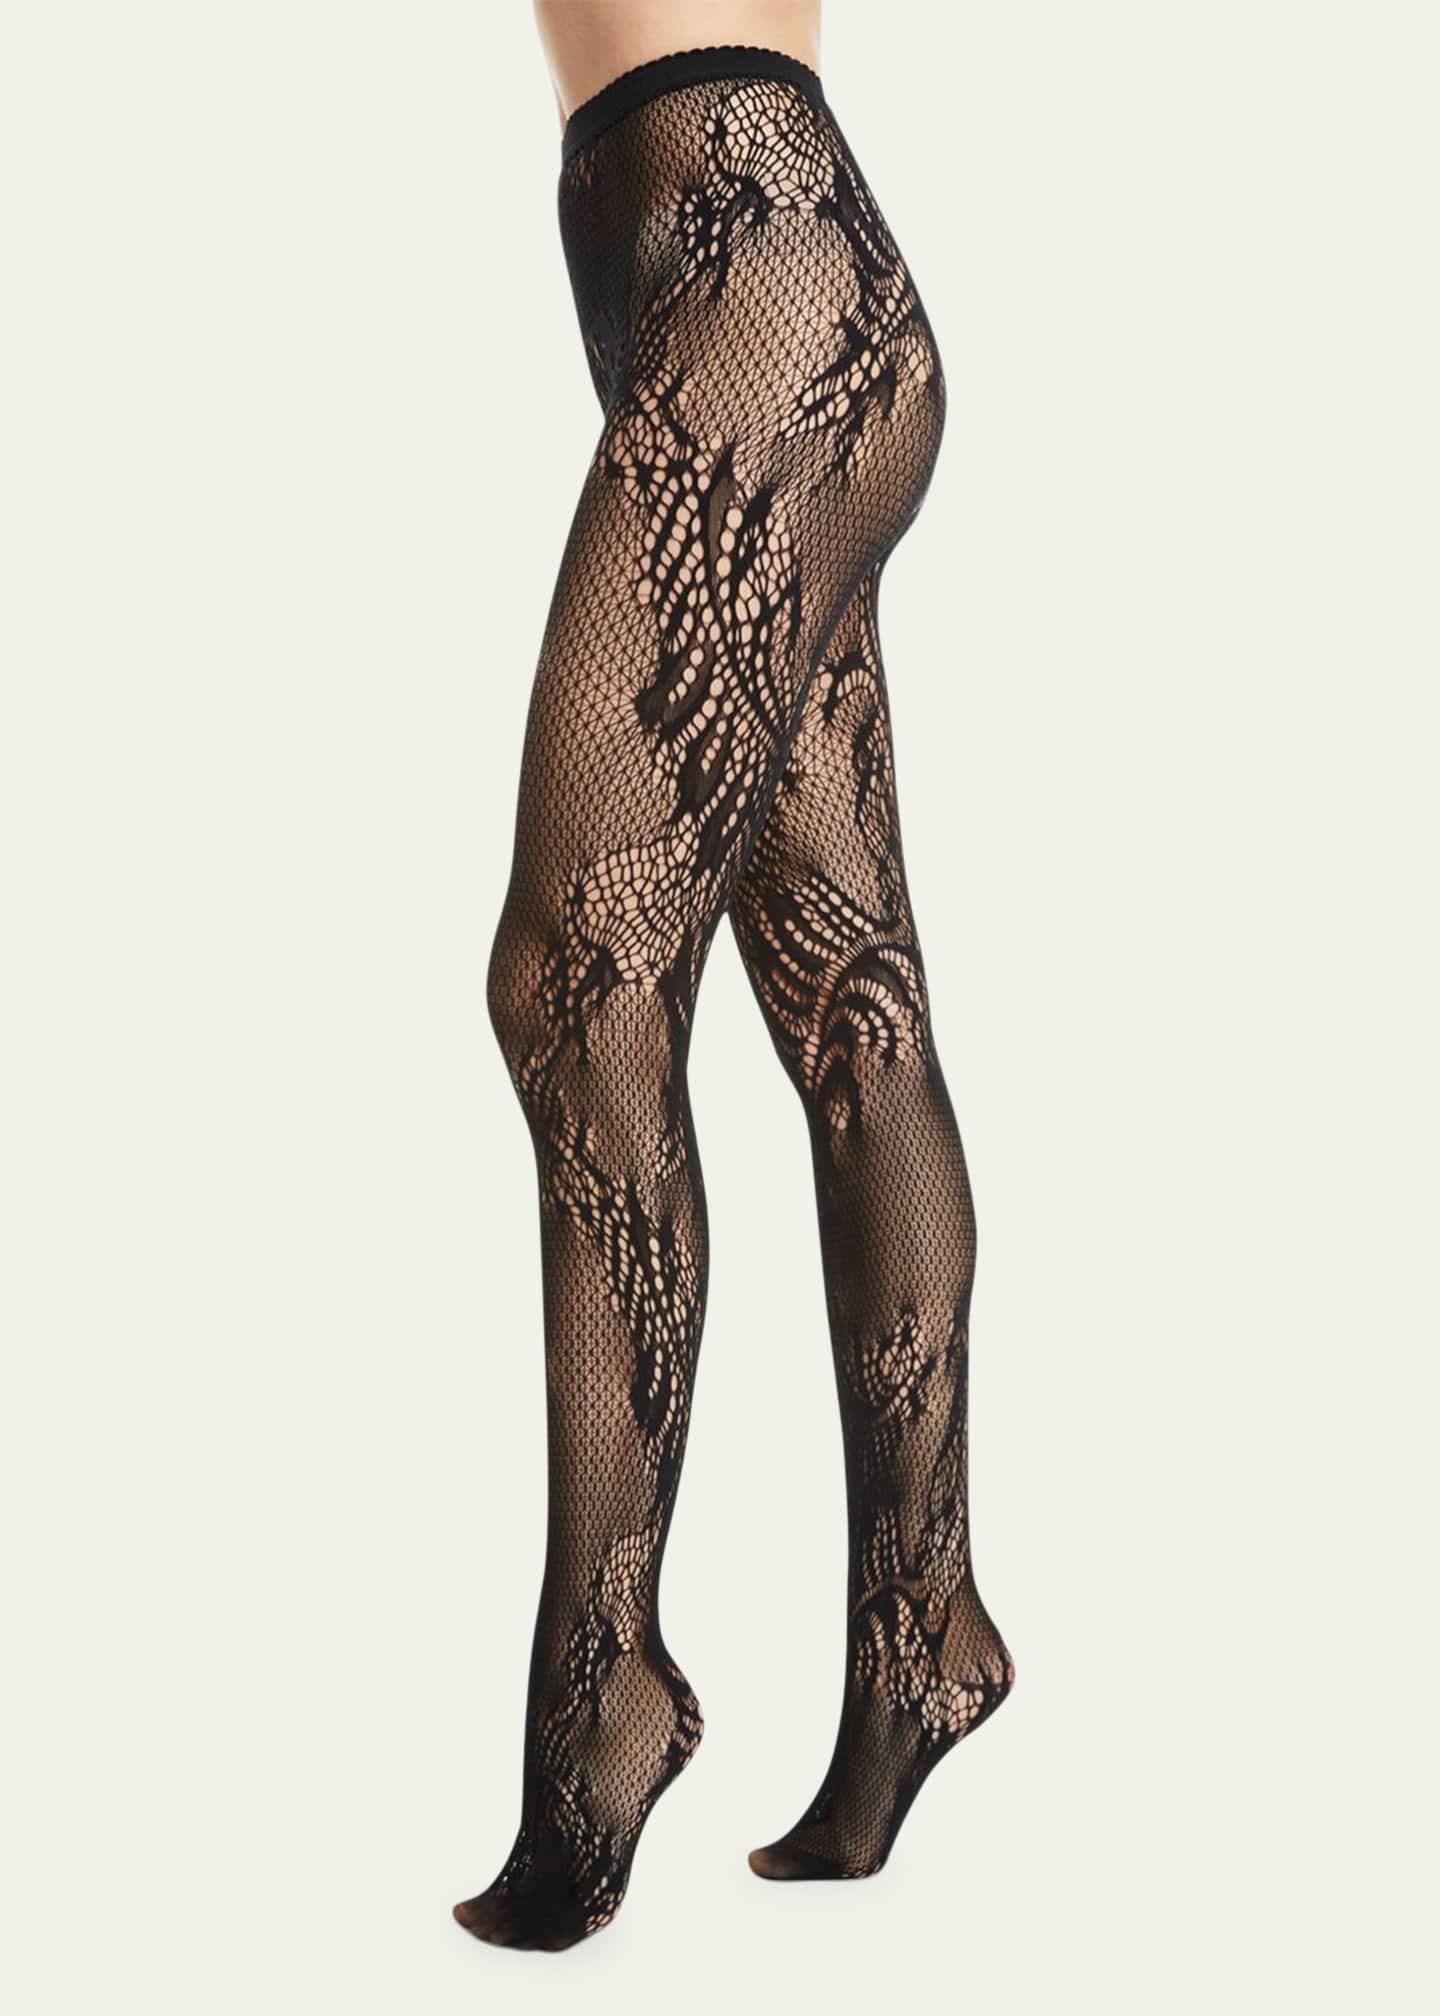 All Colors Lace Sheer Tights